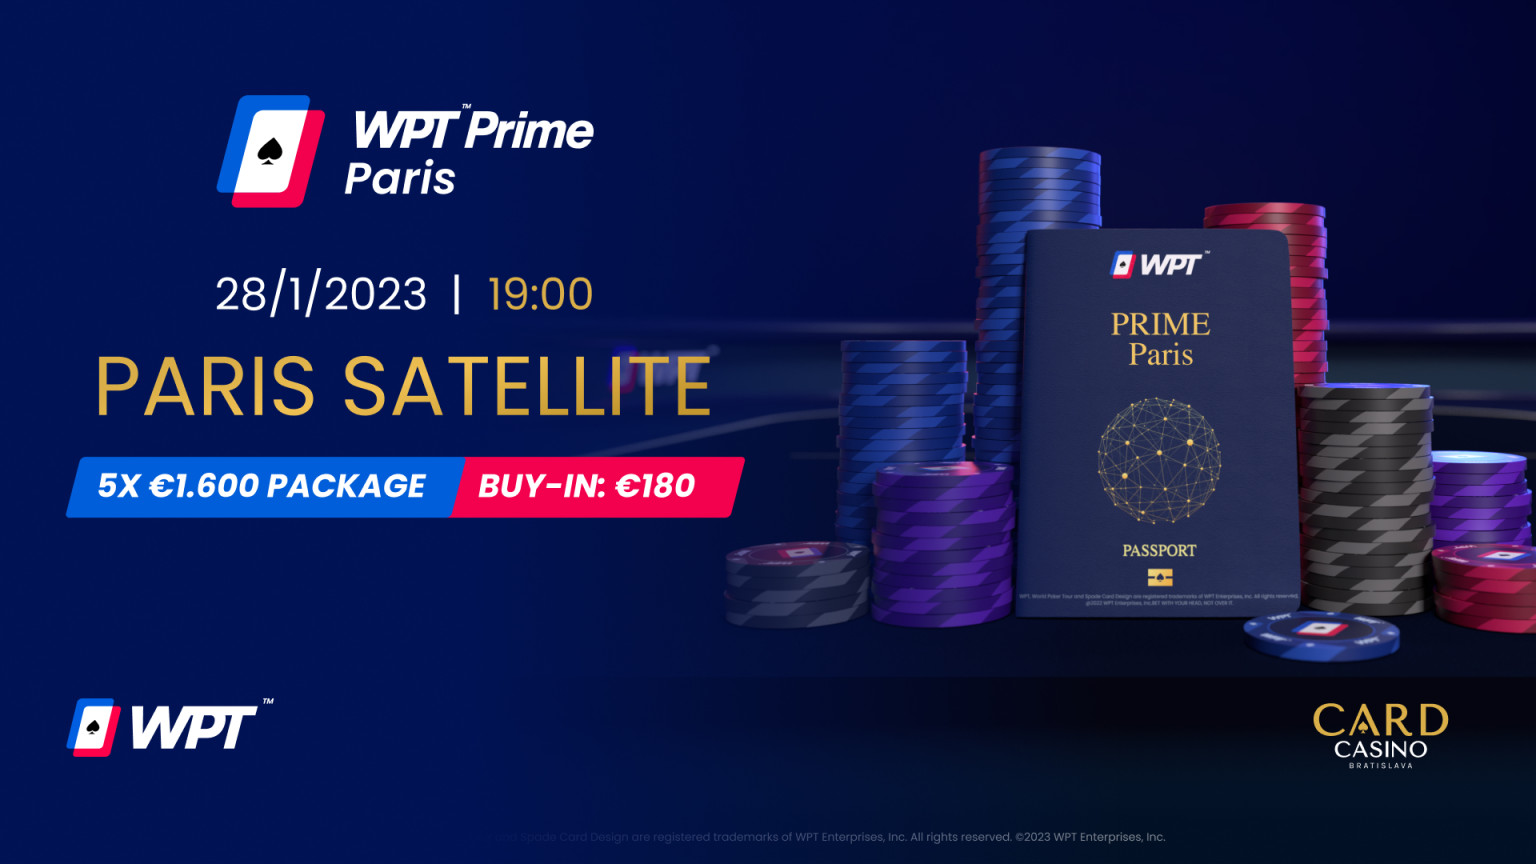 Want to play the WPT in Paris? World Event Qualifier to be played in Carde